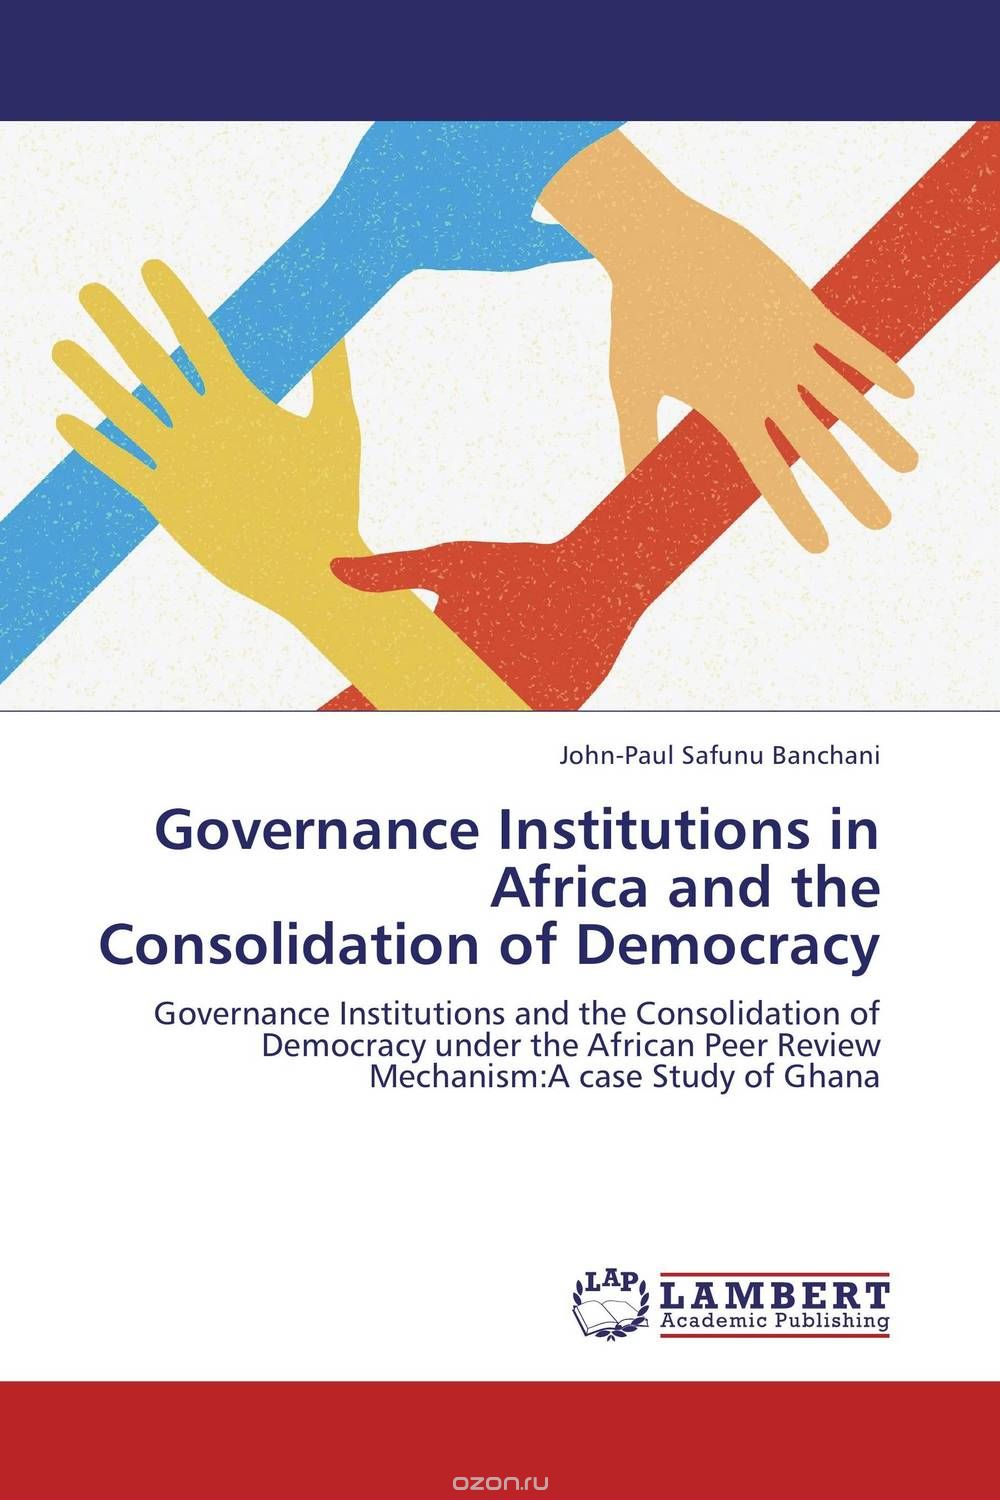 Скачать книгу "Governance Institutions in Africa and the Consolidation of Democracy"